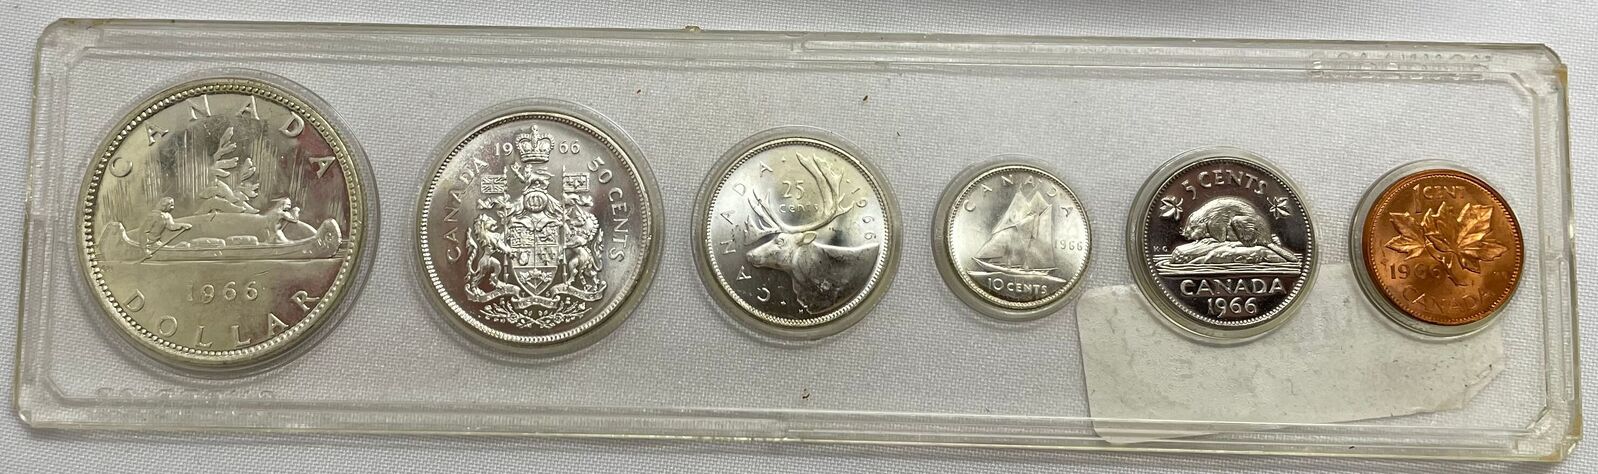 Canada 1966 Unofficial 6 Coin Mint Set product image